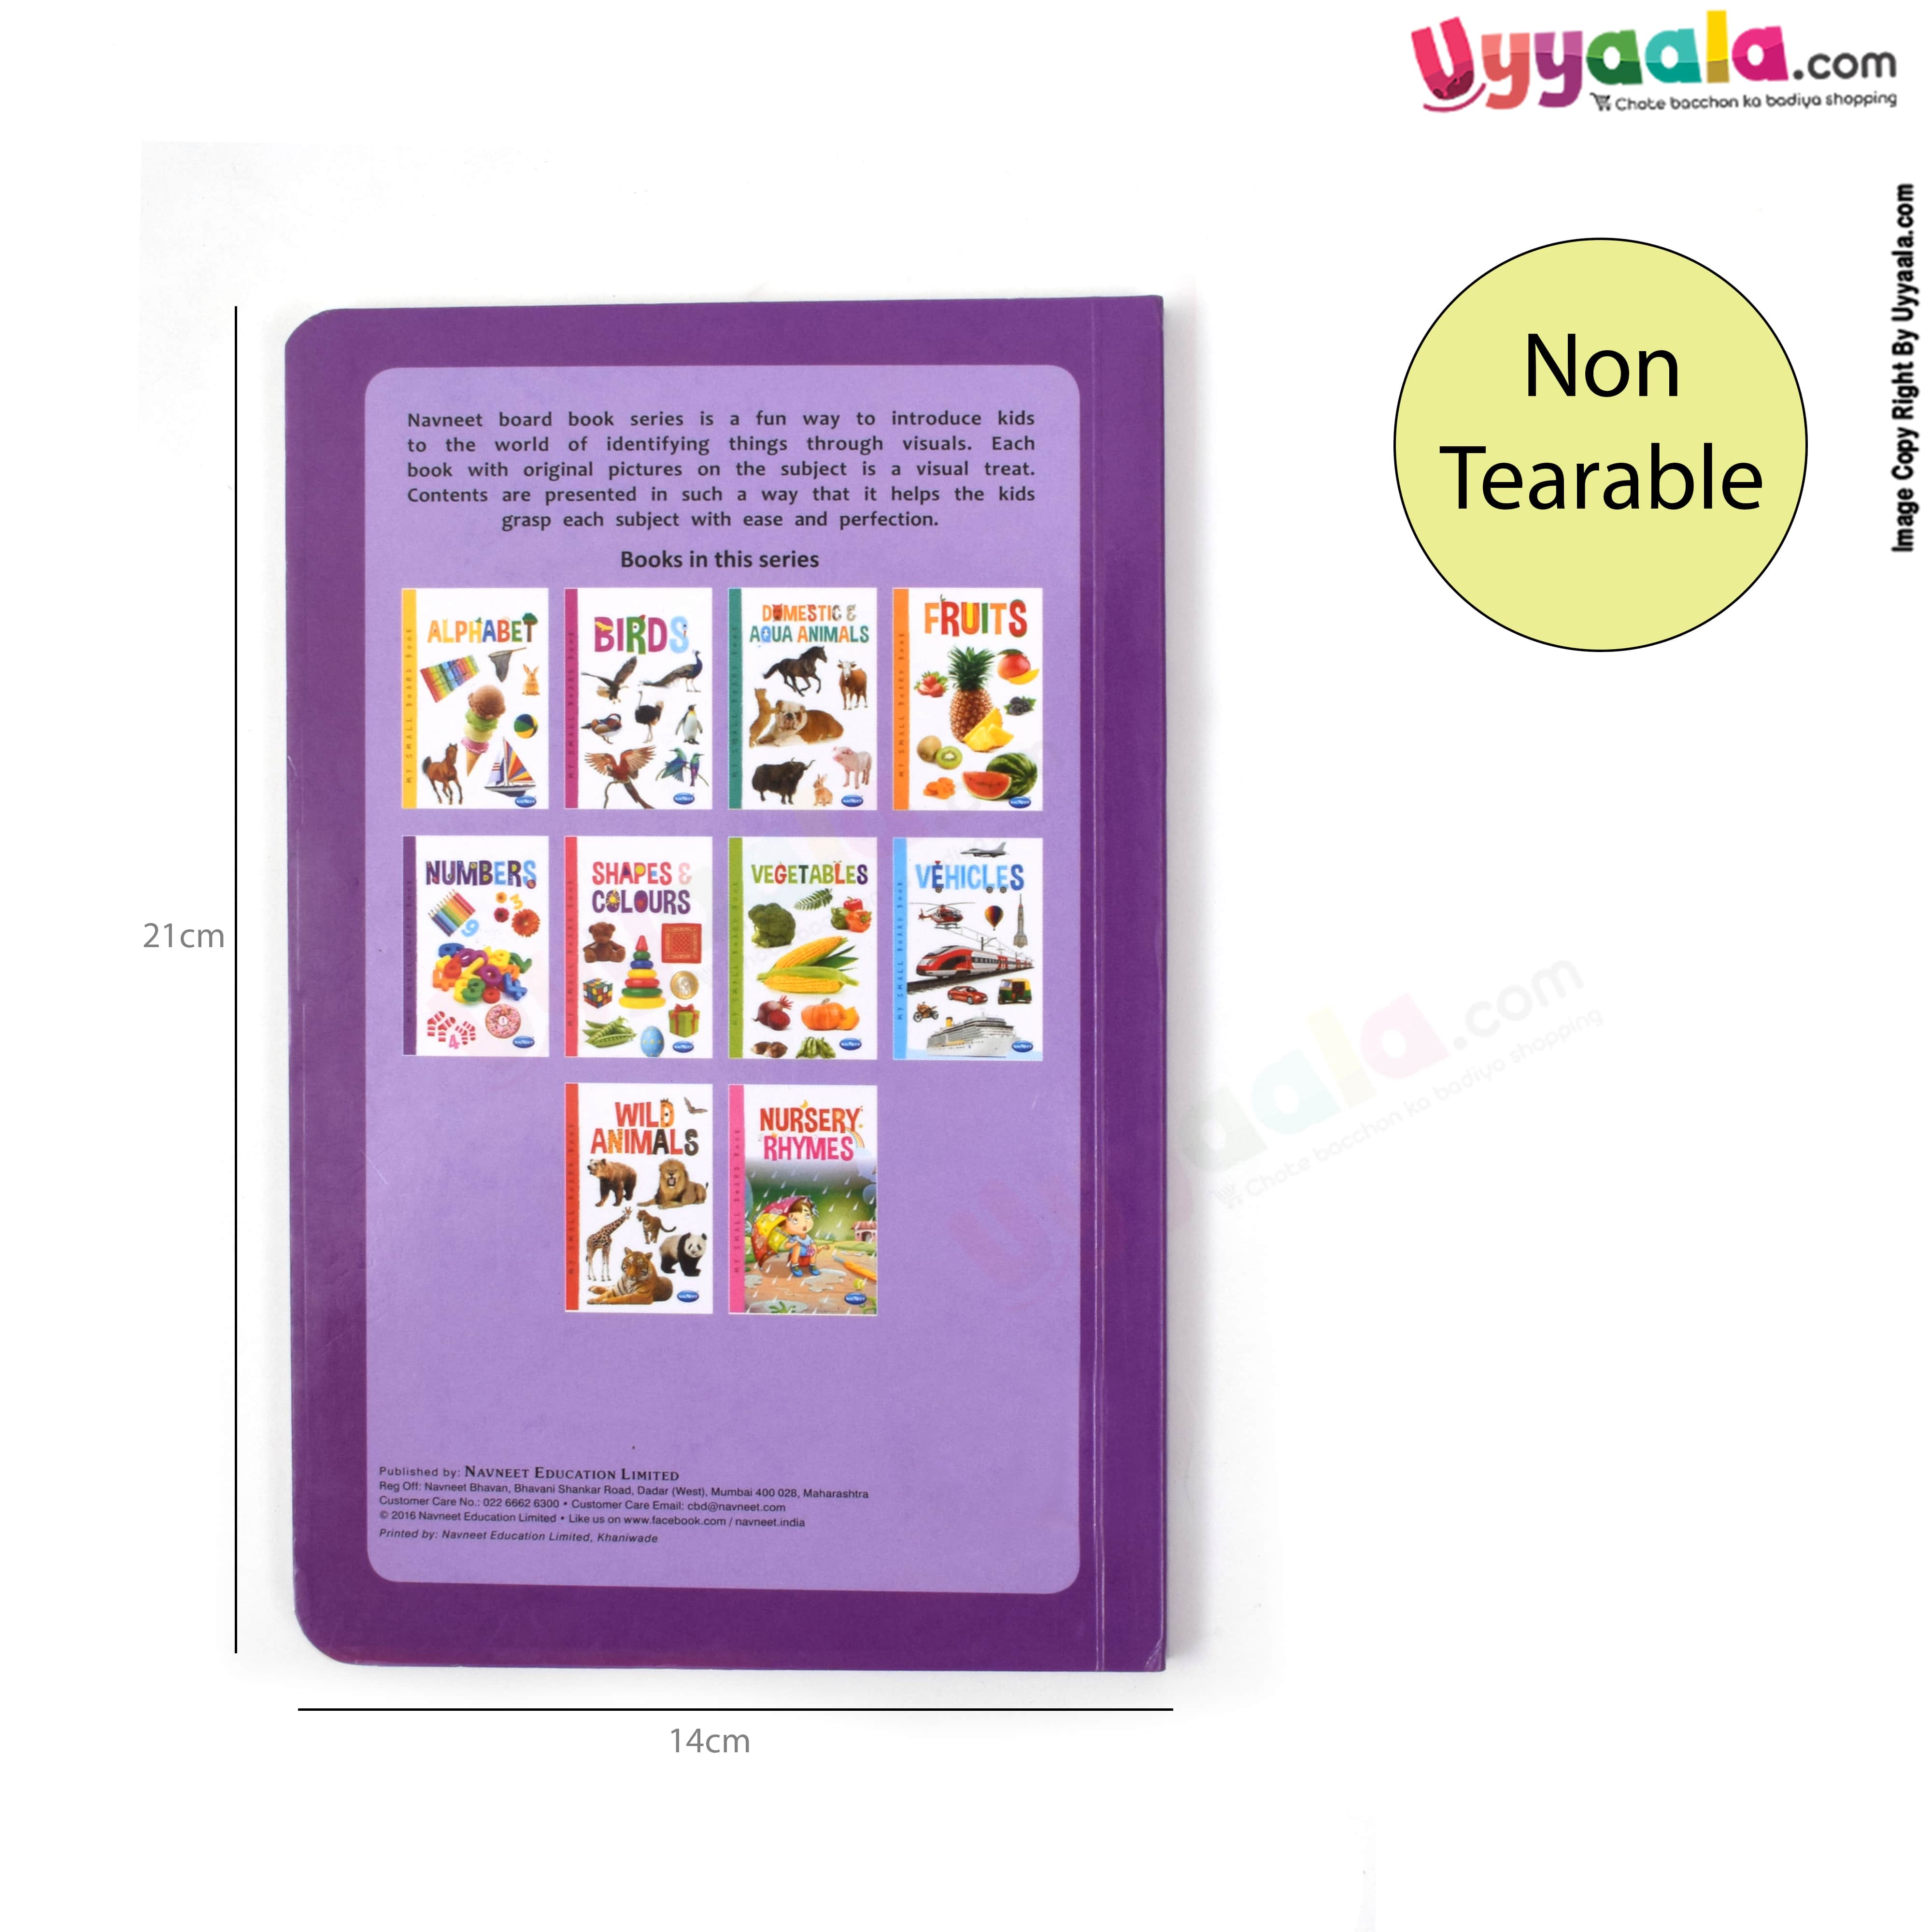 Numbers & alphabet books for childrens